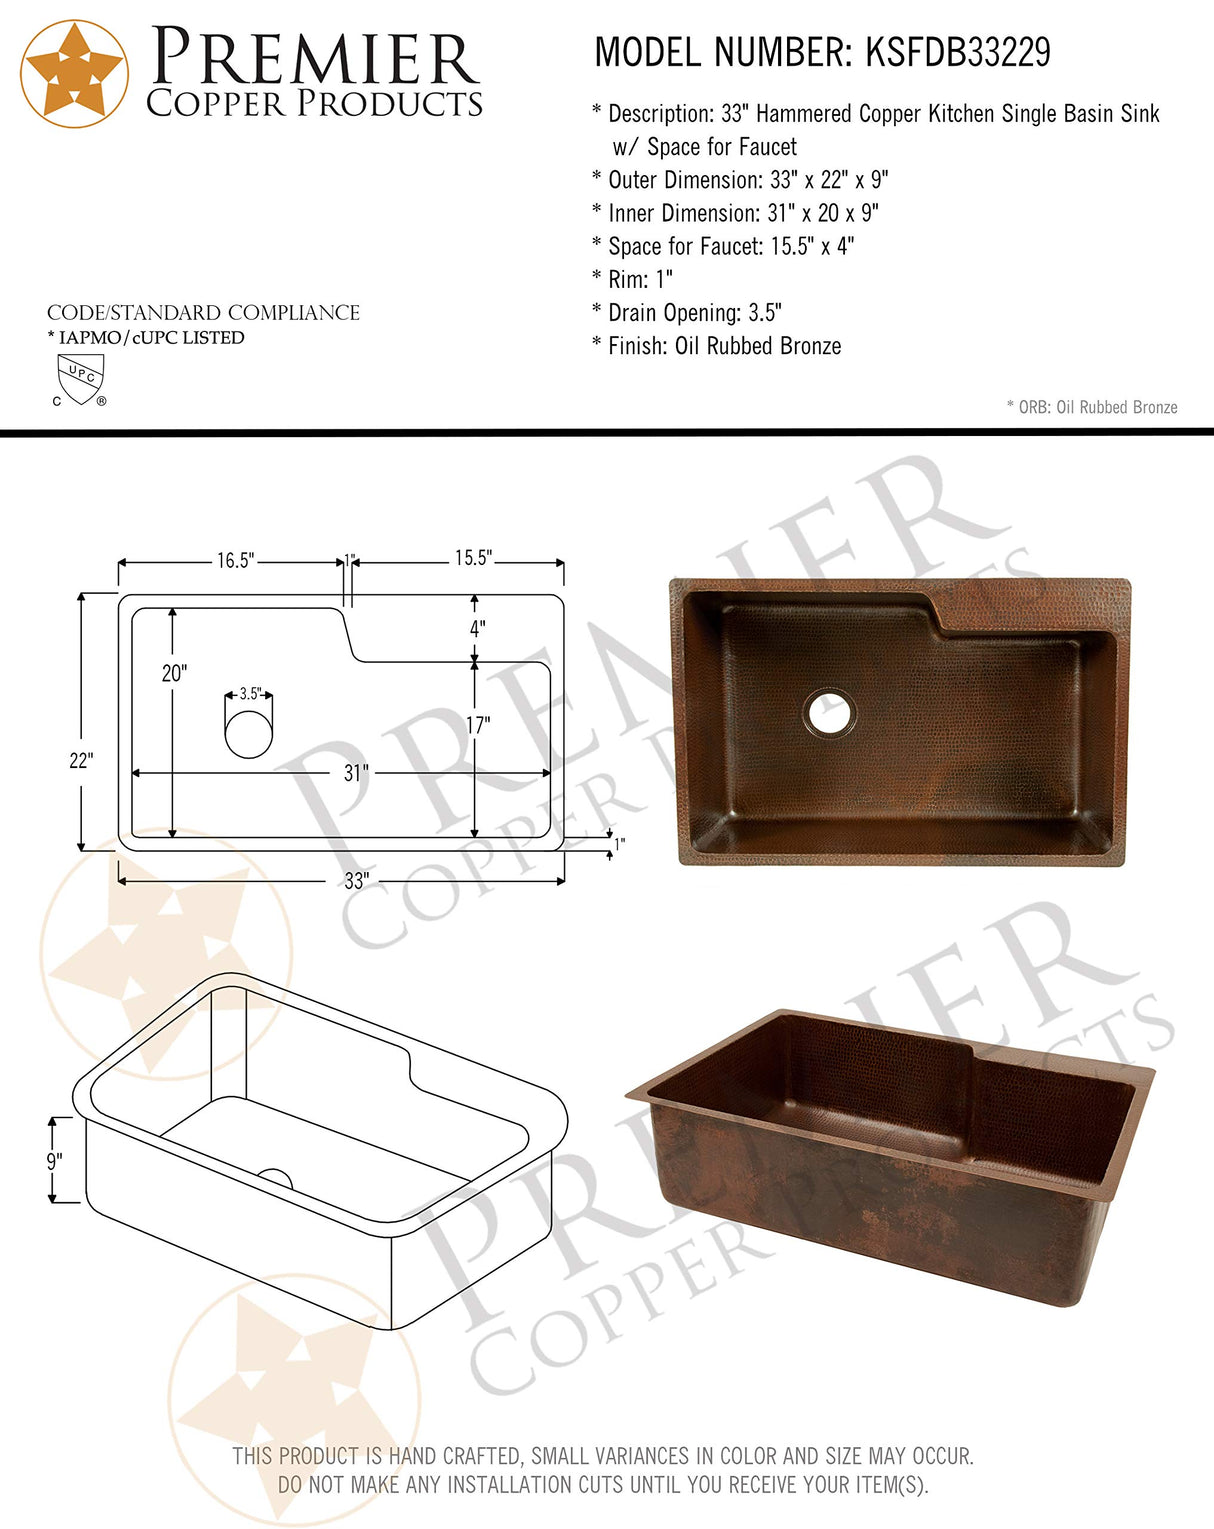 Premier Copper Products KSFDB33229 33-Inch Hammered Copper Kitchen Single Basin Sink with Space for Faucet, Oil Rubbed Bronze